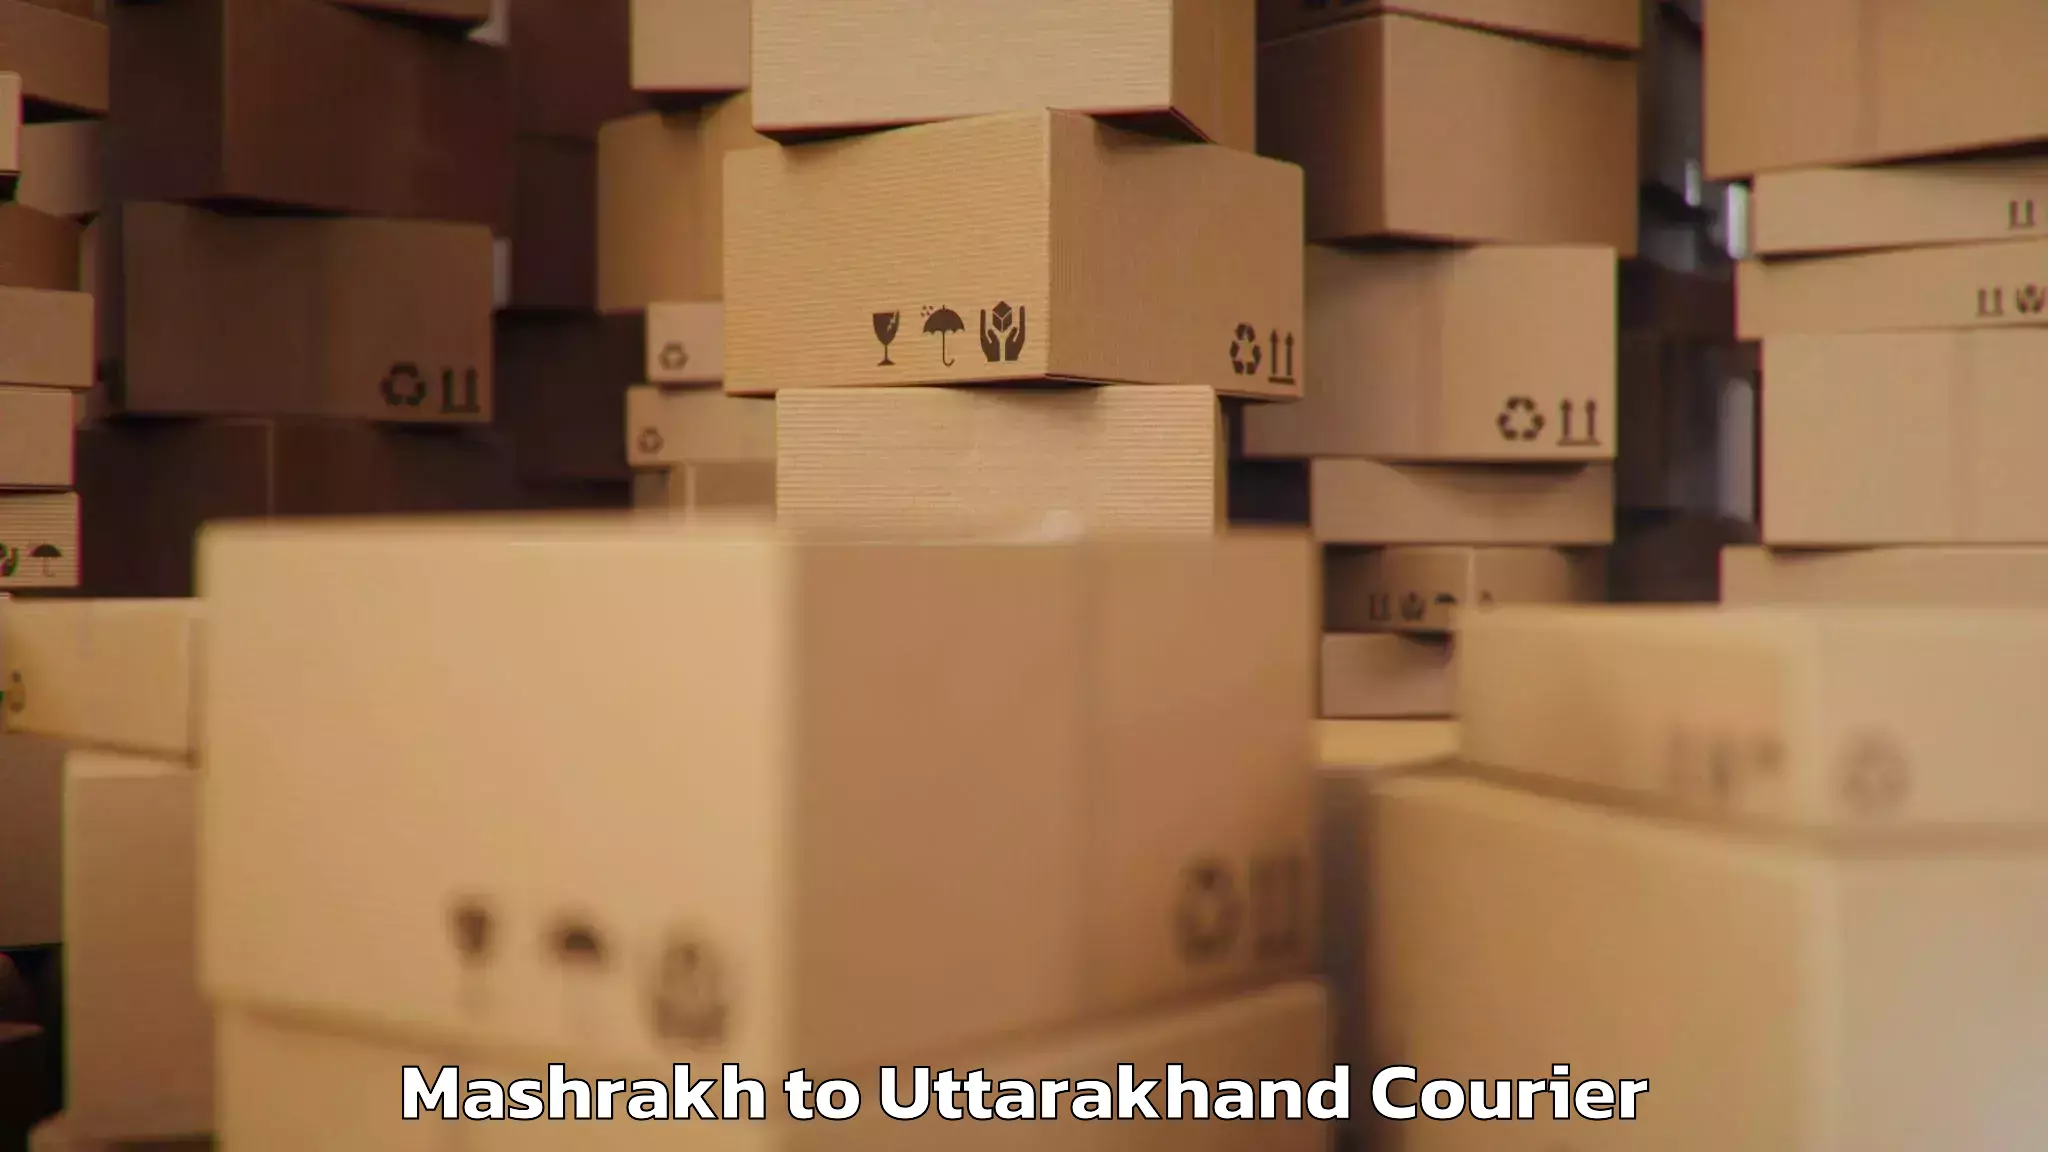 Personal effects shipping Mashrakh to IIT Roorkee